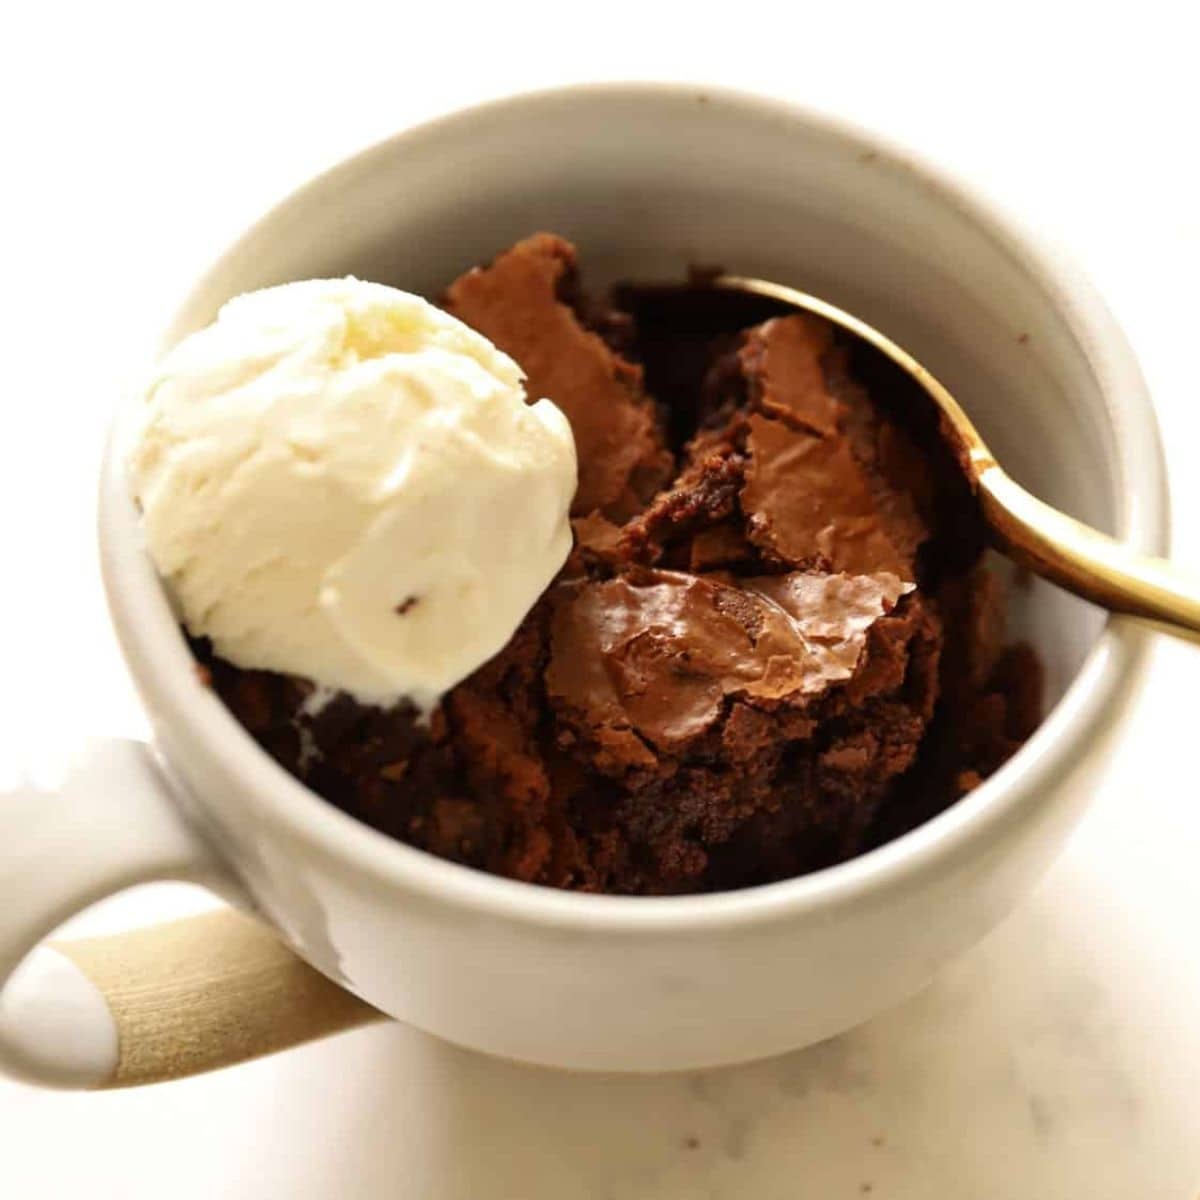 Brownie cake scooped into a mug with ice cream